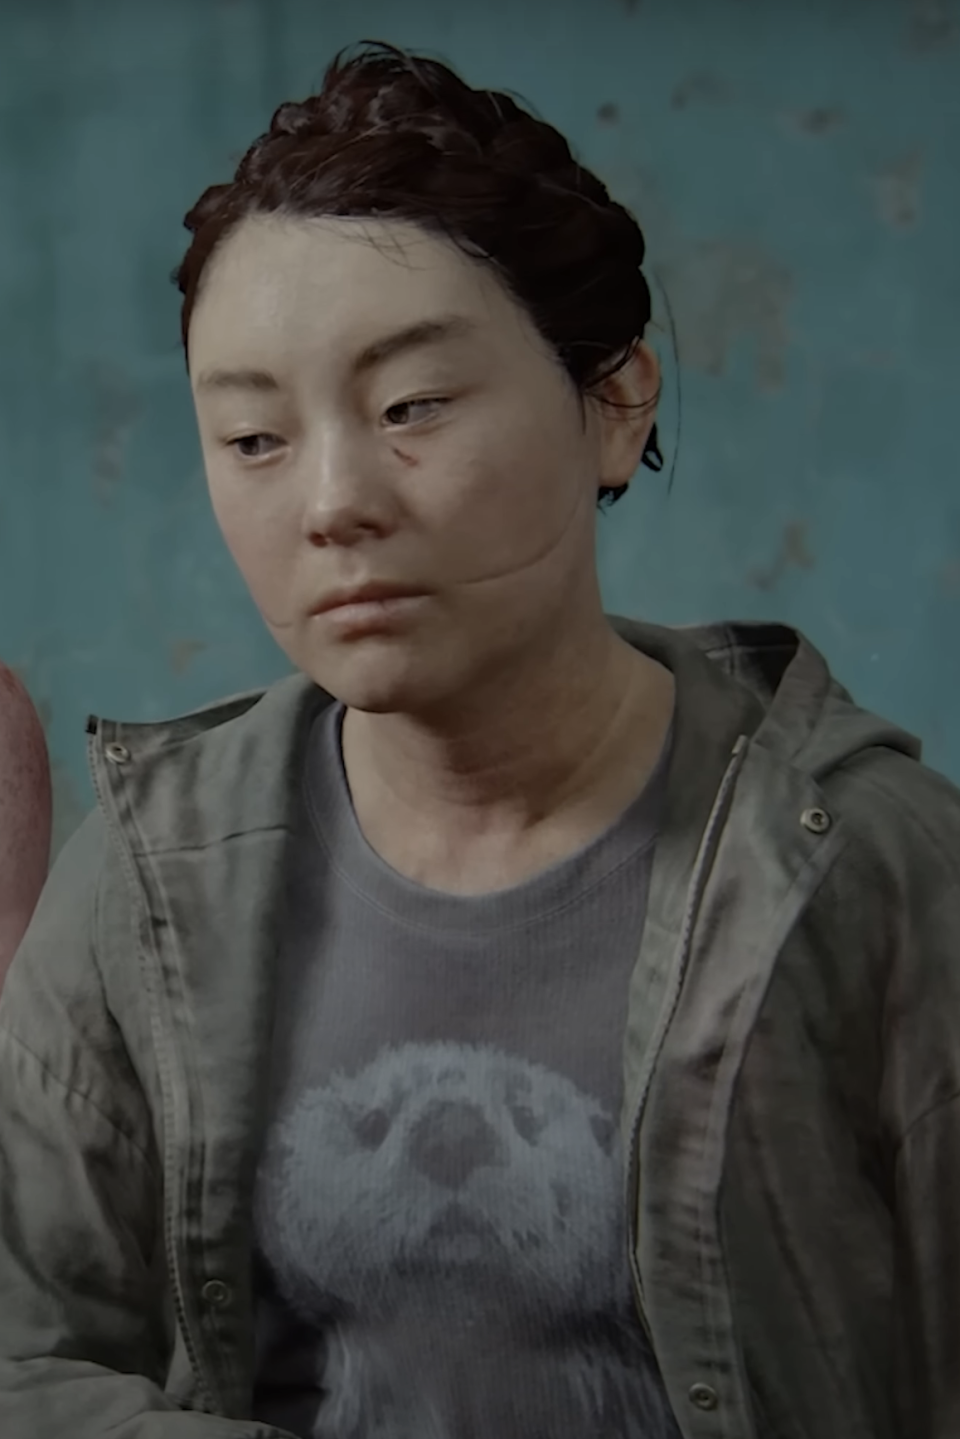 Yara in The Last of Us Part II with a concerned expression, wearing a jacket over a t-shirt with a bear graphic